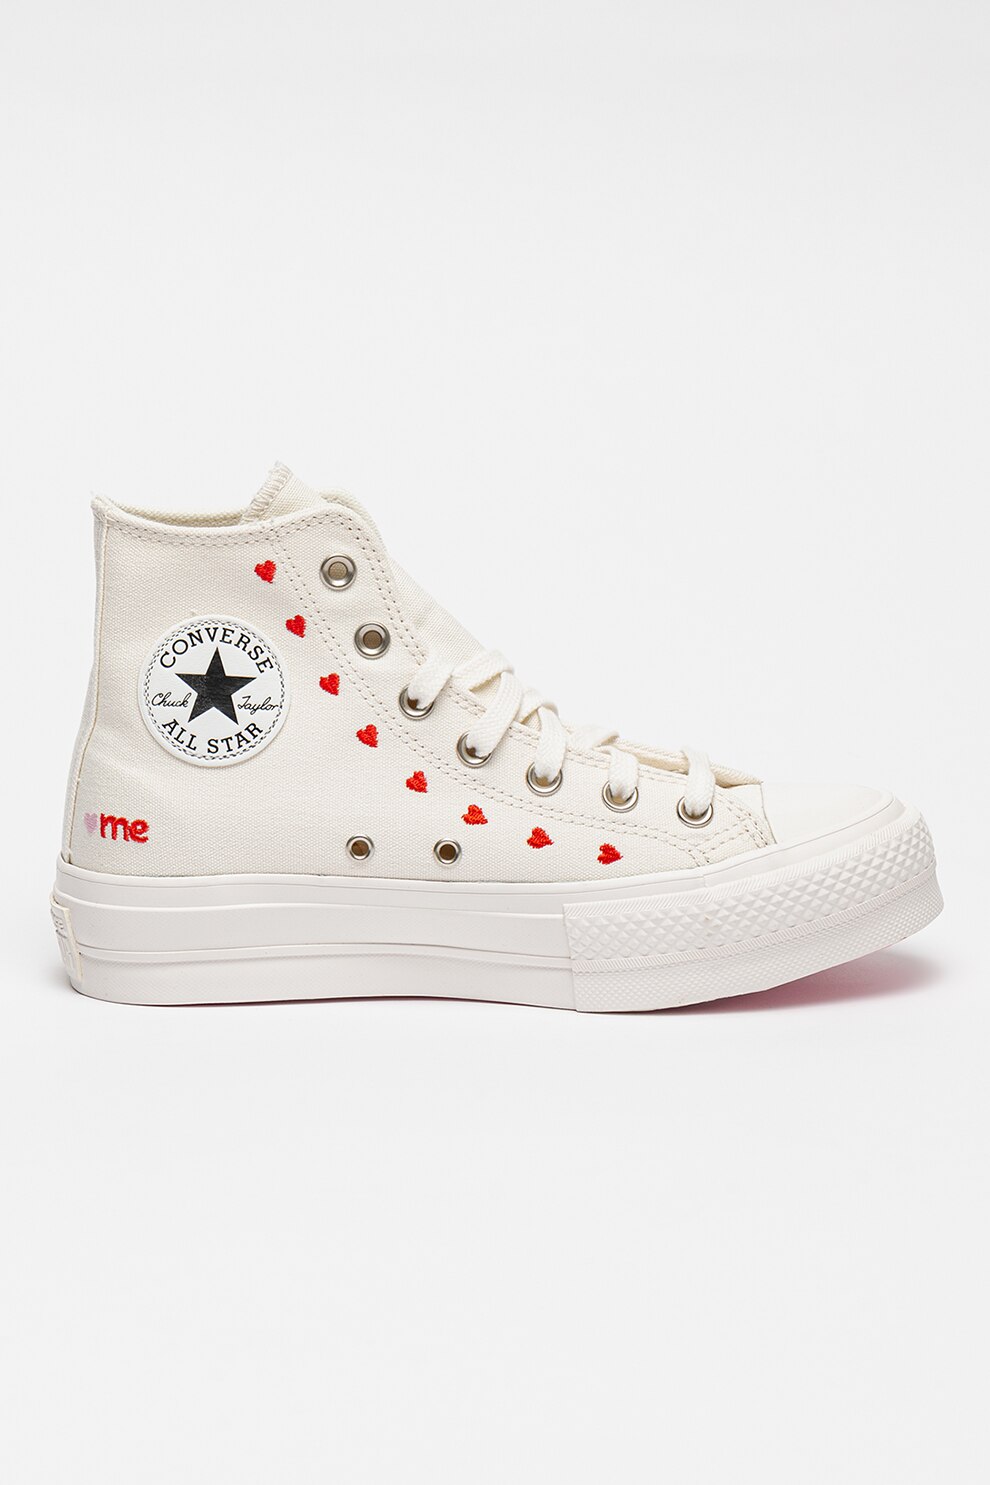 Dictatorship crown difference Converse, Tenisi medii Chuck Taylor All Star Lift, Rosu, Crem, 6.5 - eMAG.ro